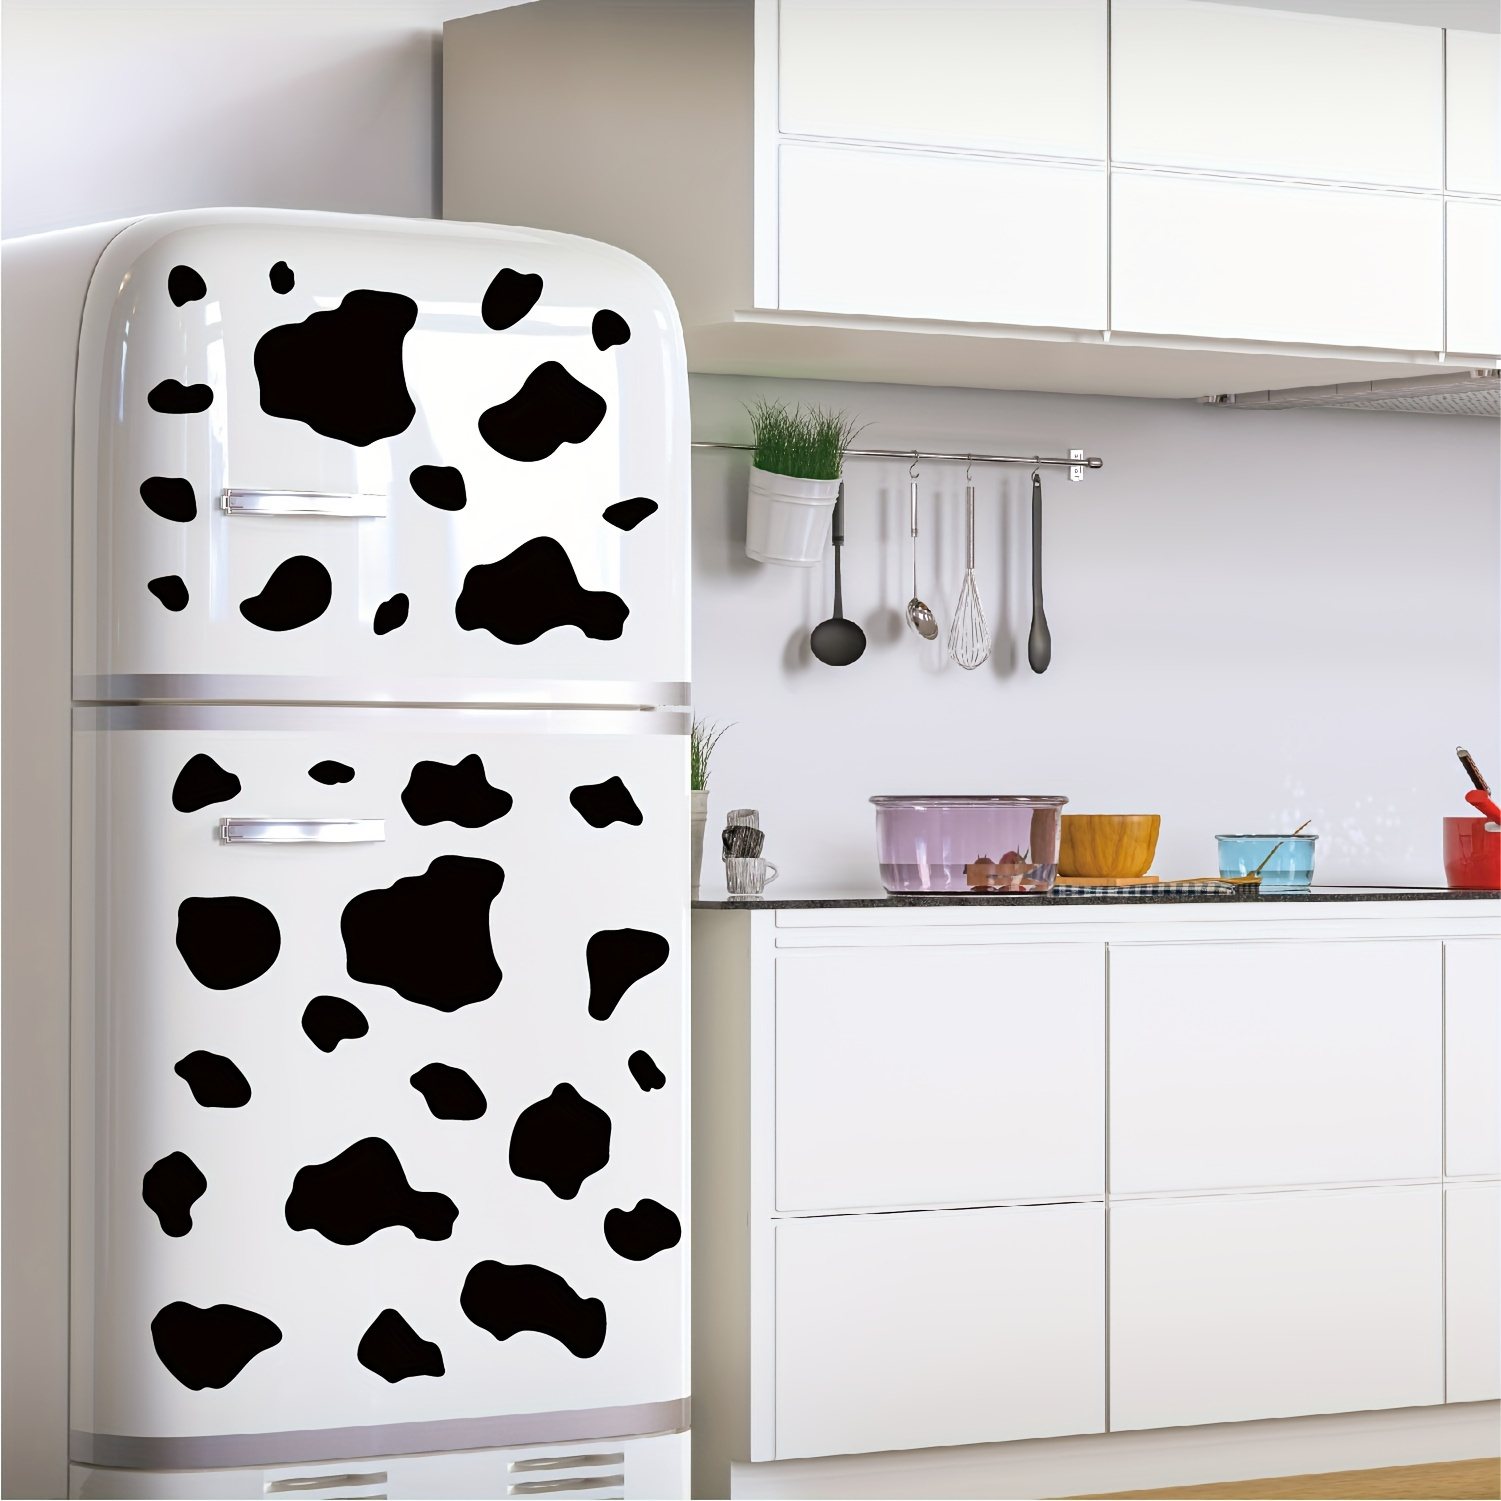 

112 Stickers/4pcs New Arrival Big Cow Pattern Wall Stickers Black Geometric Abstract Bedroom Home Decoration Water Cup Refrigerator Waterproof Pvc Self-adhesive Art Decorative Wall Stickers